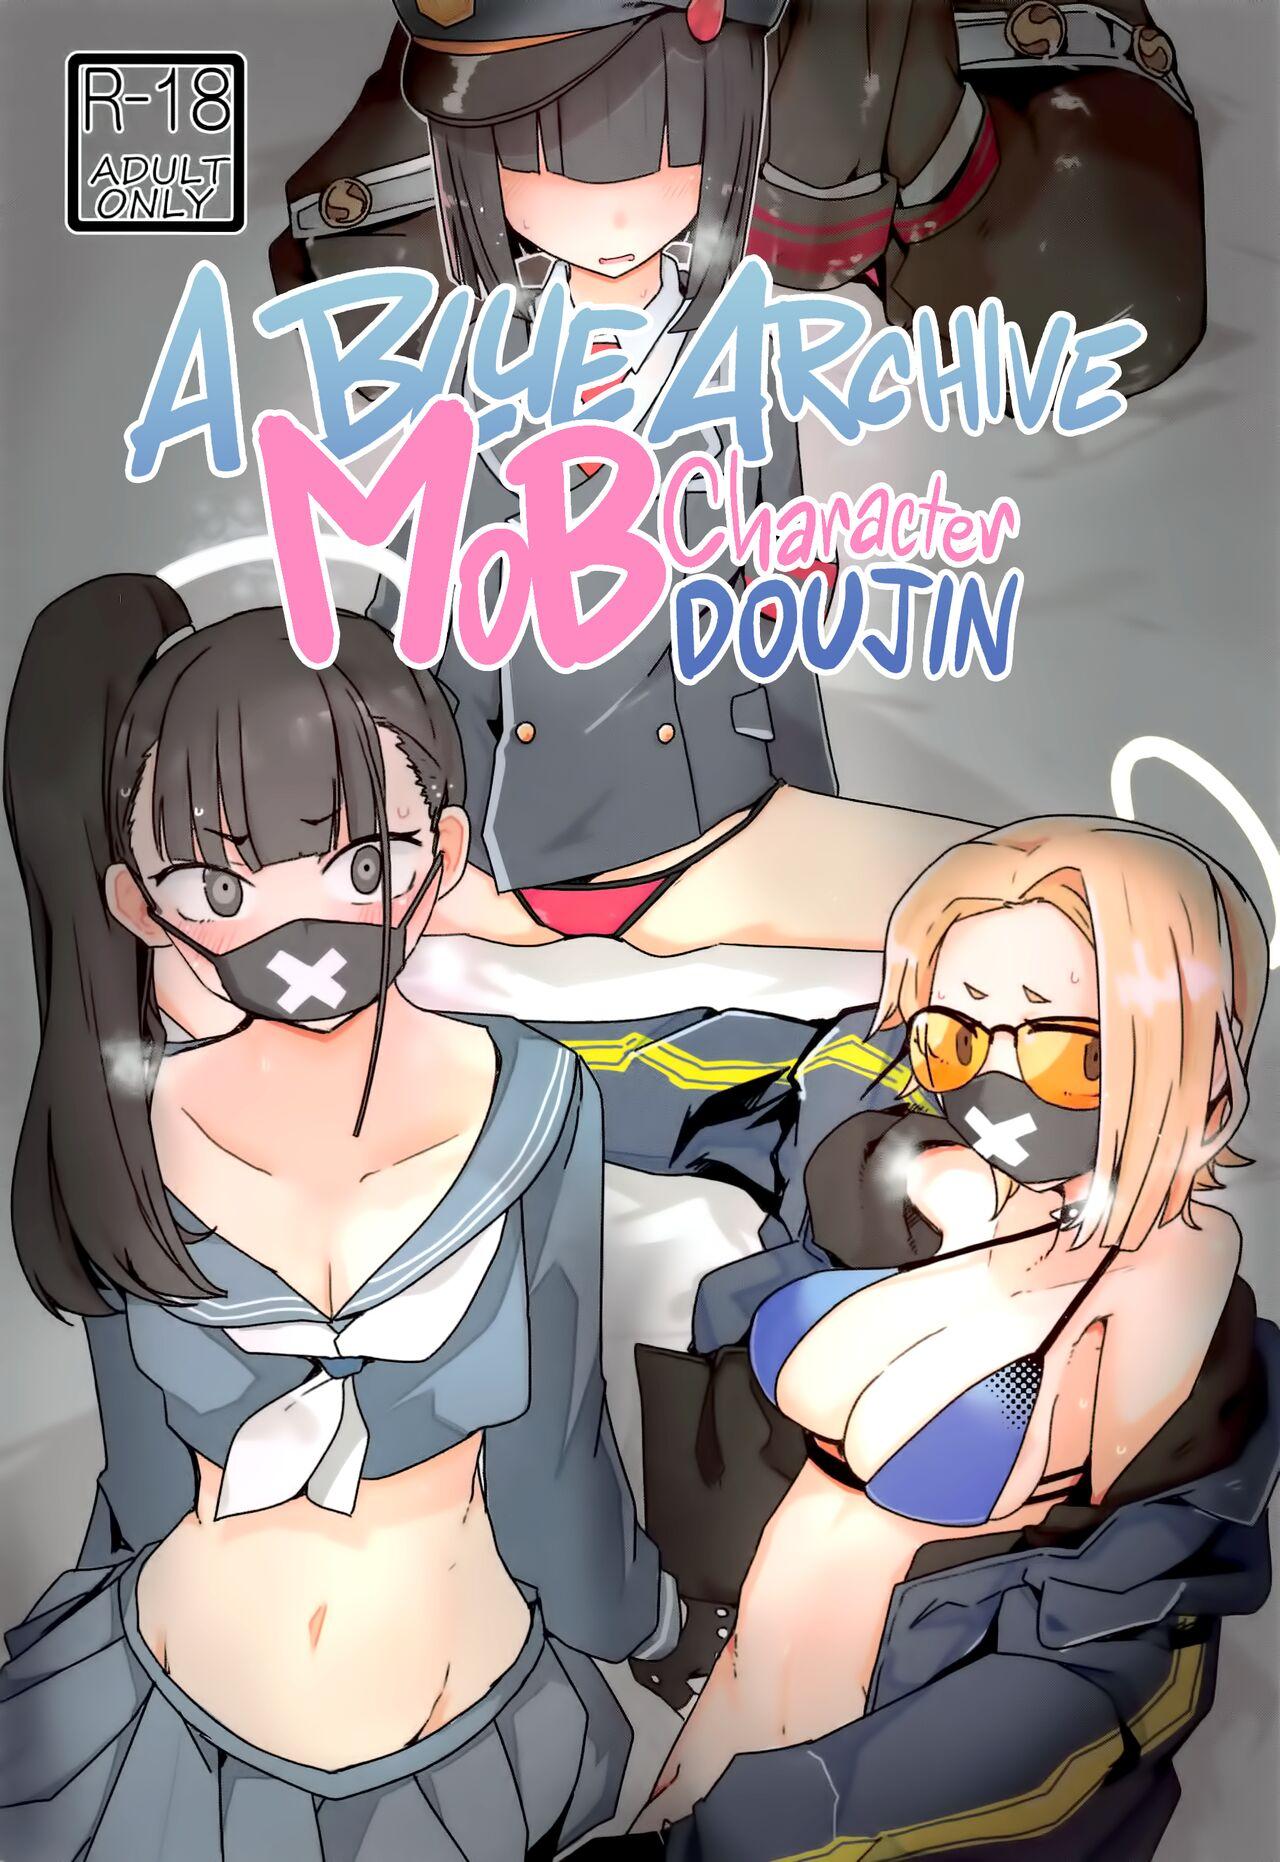 Hot Pussy Buruakamobu Erohon | A Blue Archive Mob Character Doujin. - Blue archive Clothed - Picture 1